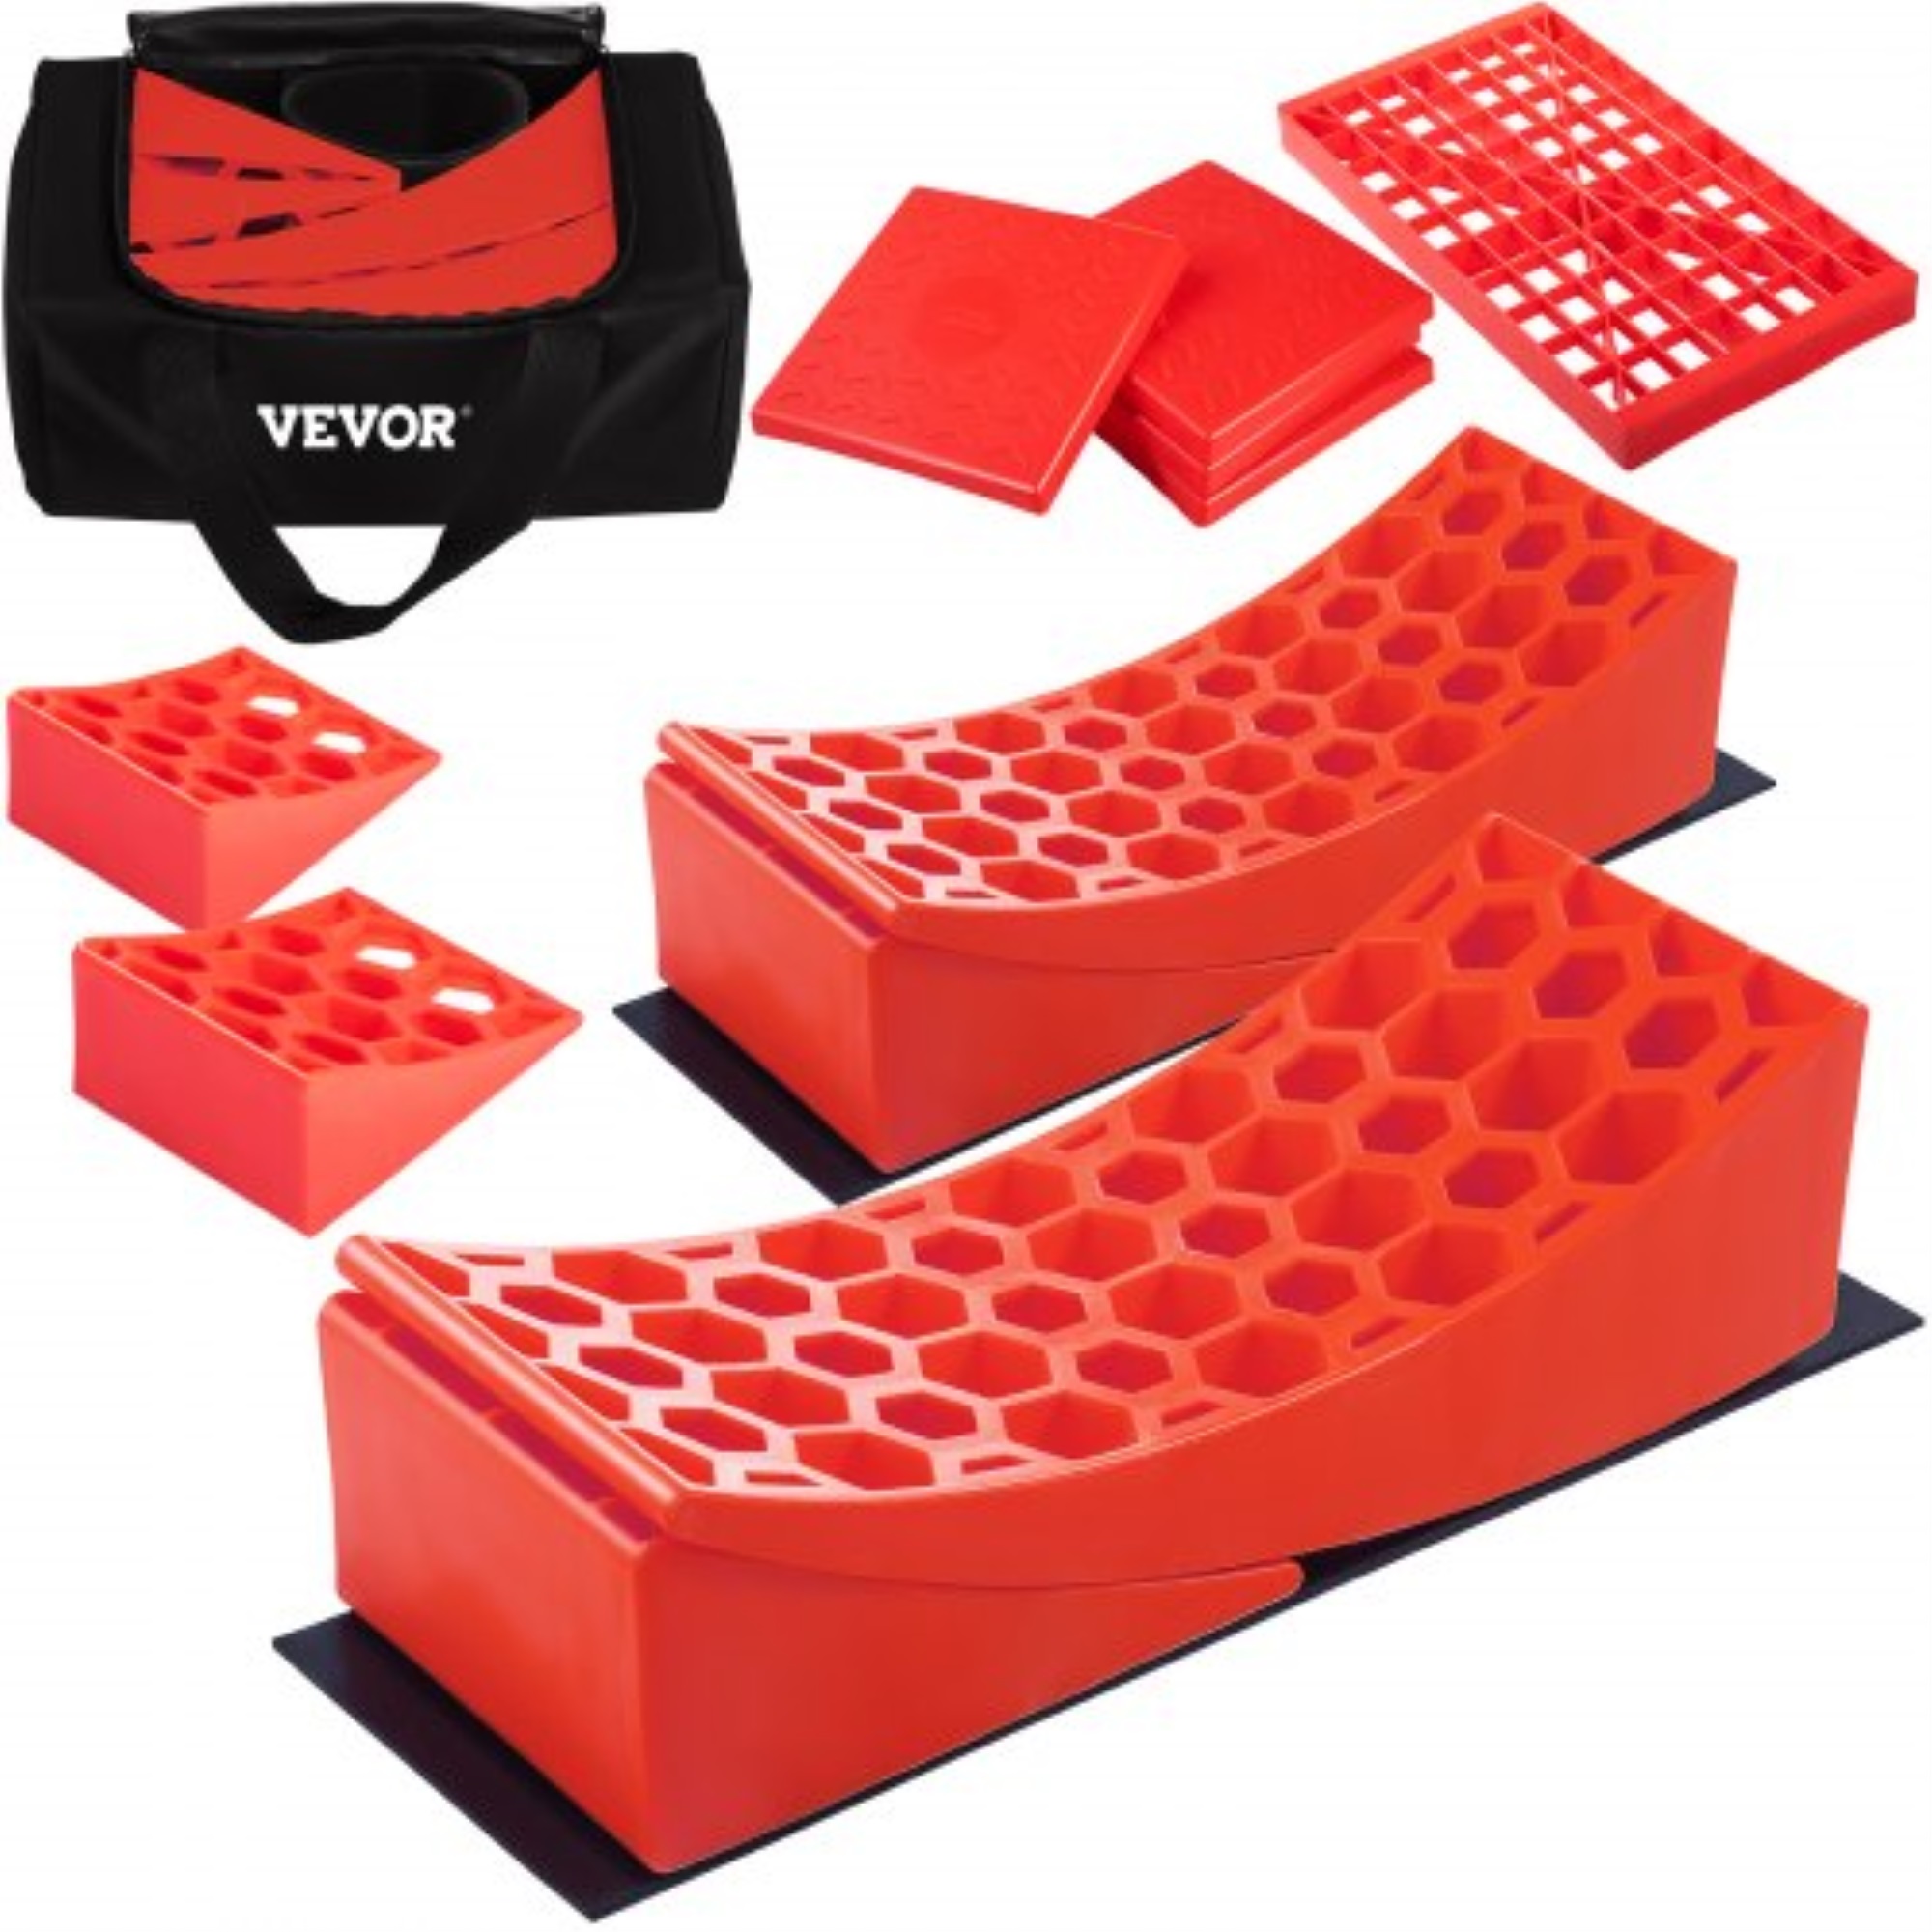 VEVOR Camper Leveler, 14 Pack, HDPE RV Leveling Blocks, Includes Two Curved Levelers, Four Chocks, Four Pads, Two Anti-Slip Ma